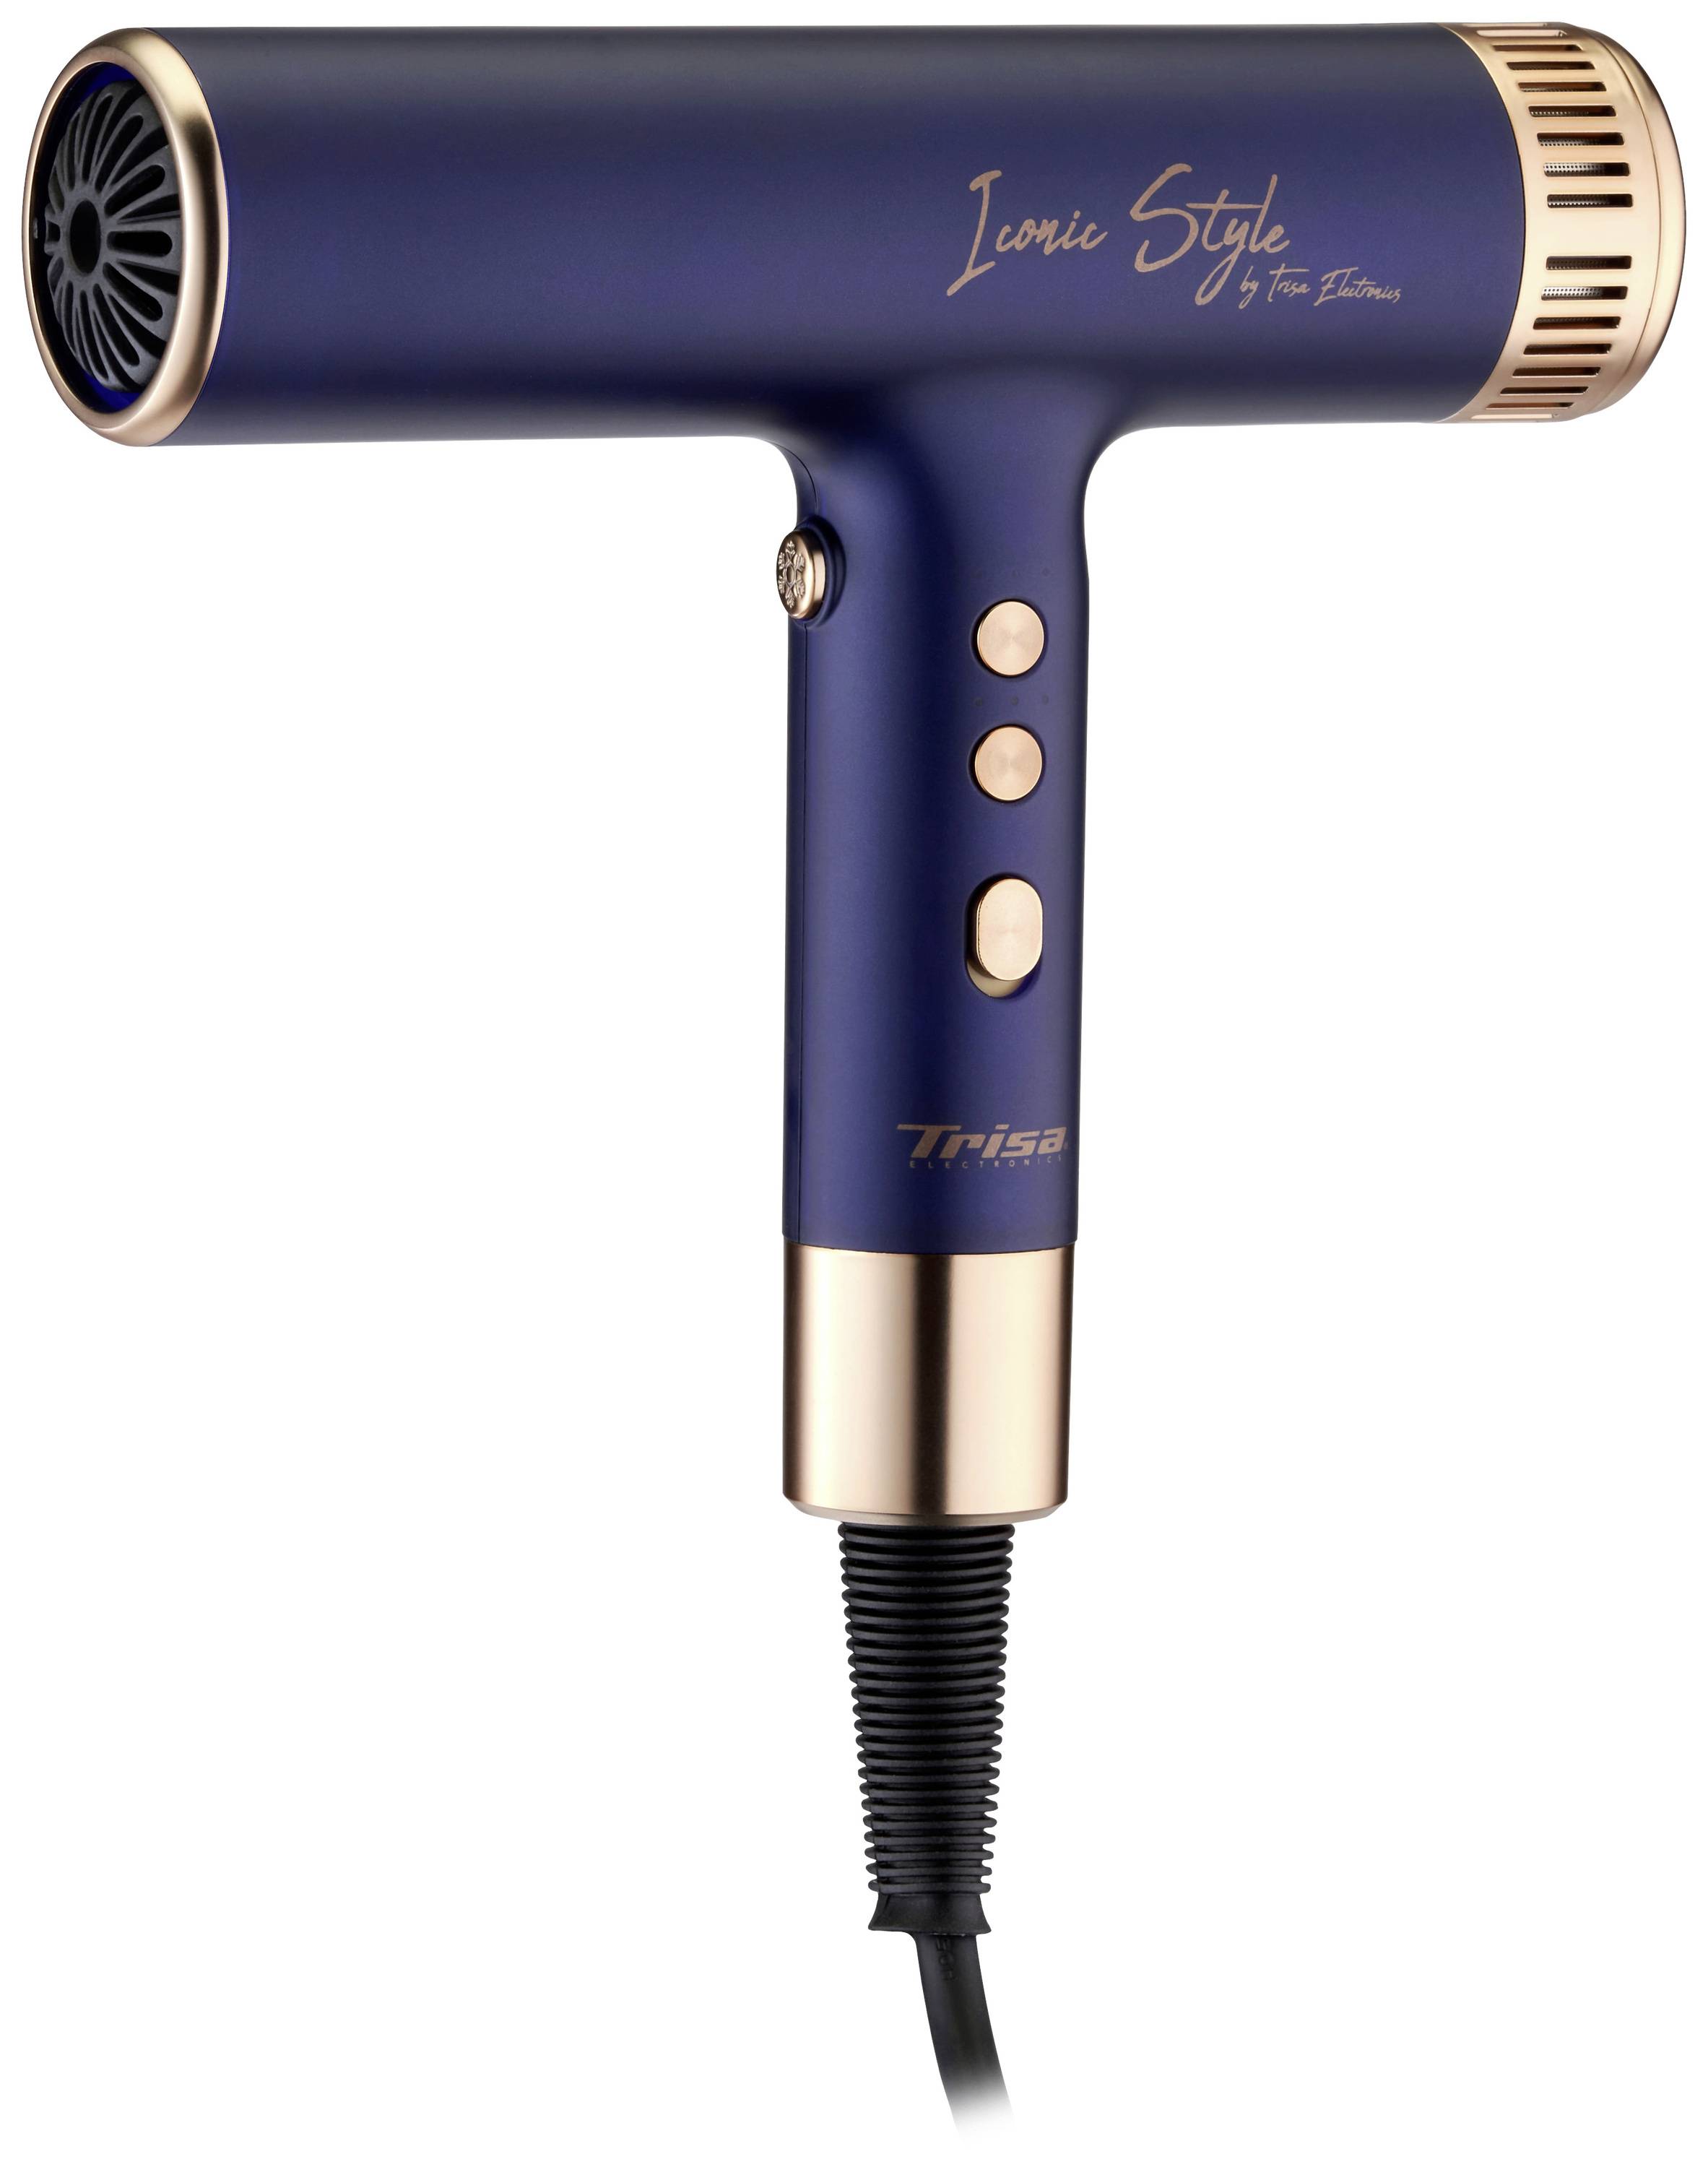 Trisa Ionic Style Hair dryer Blue, Rose Gold 